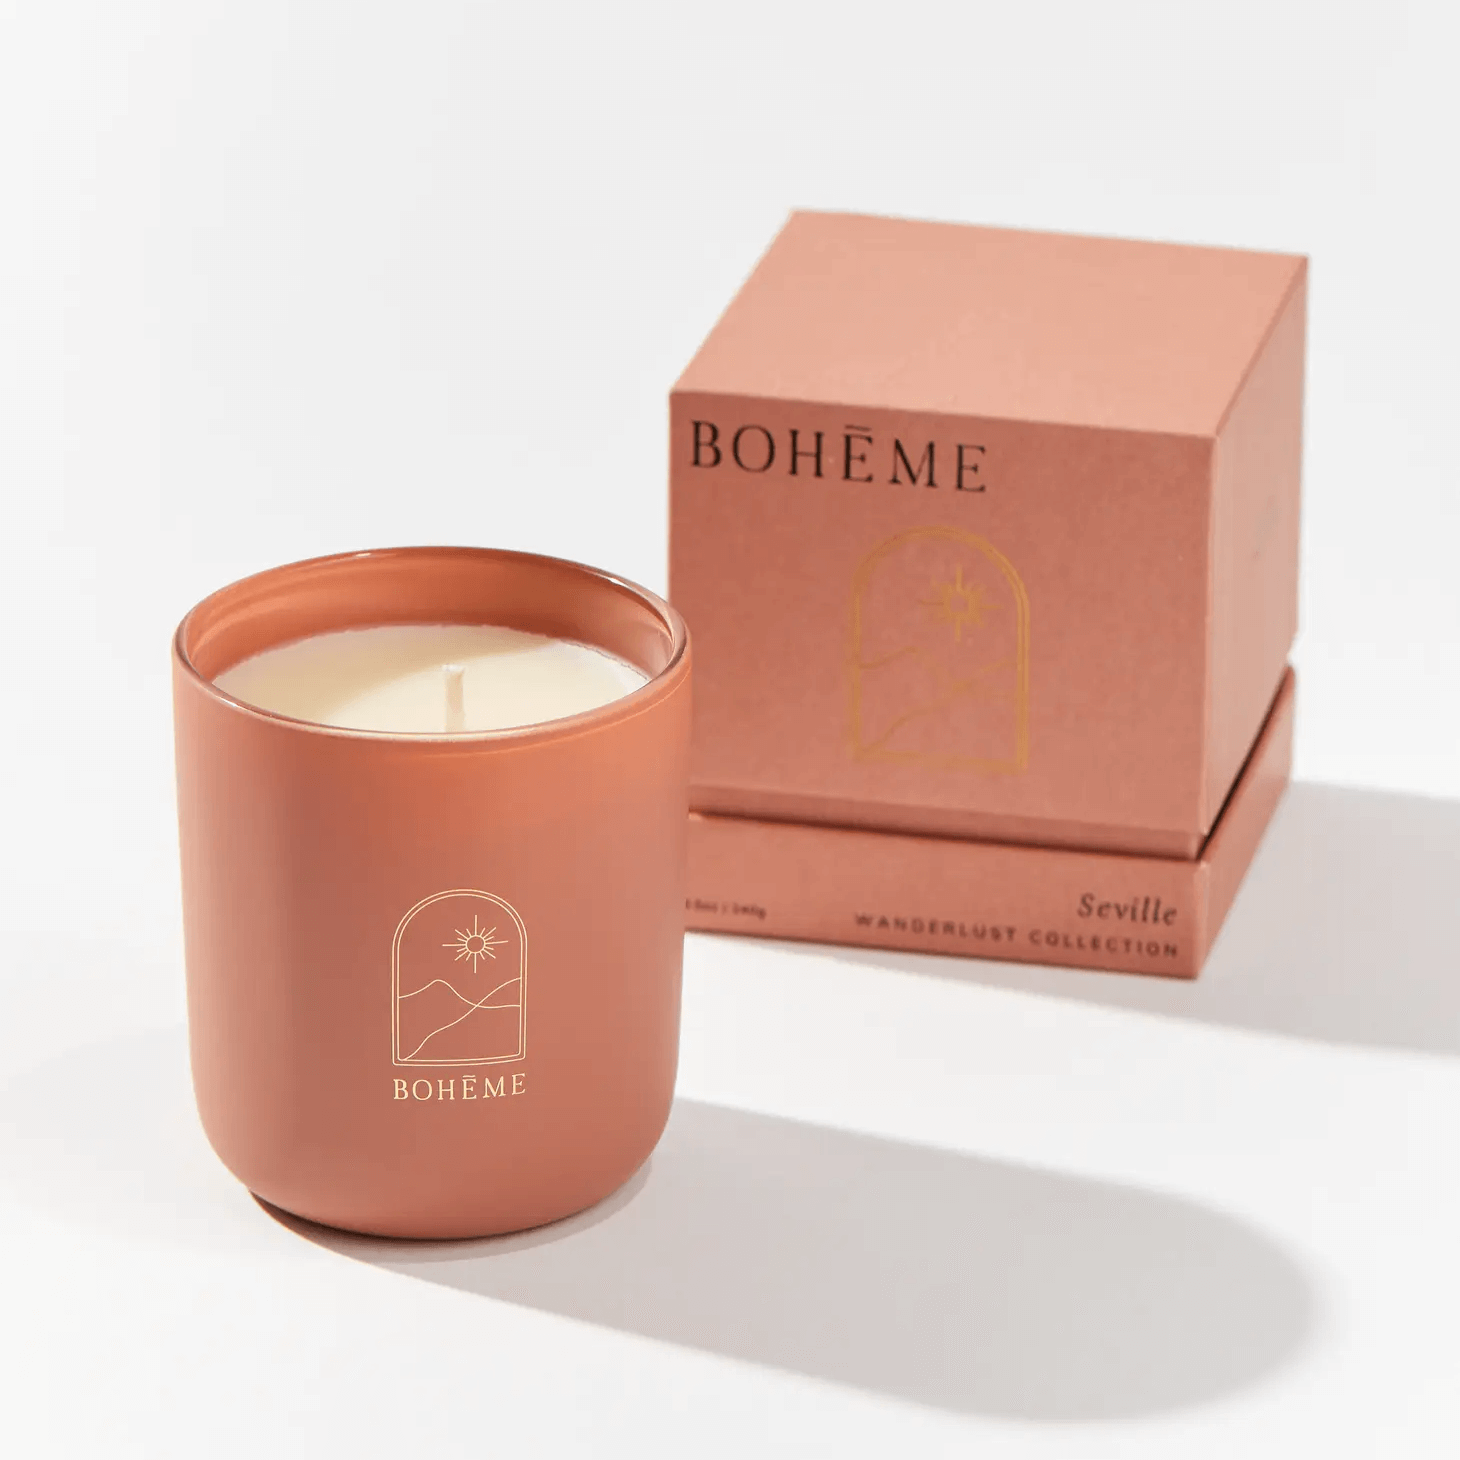 Boheme Seville Scented Candle - Osmology Scented Candles & Home Fragrance